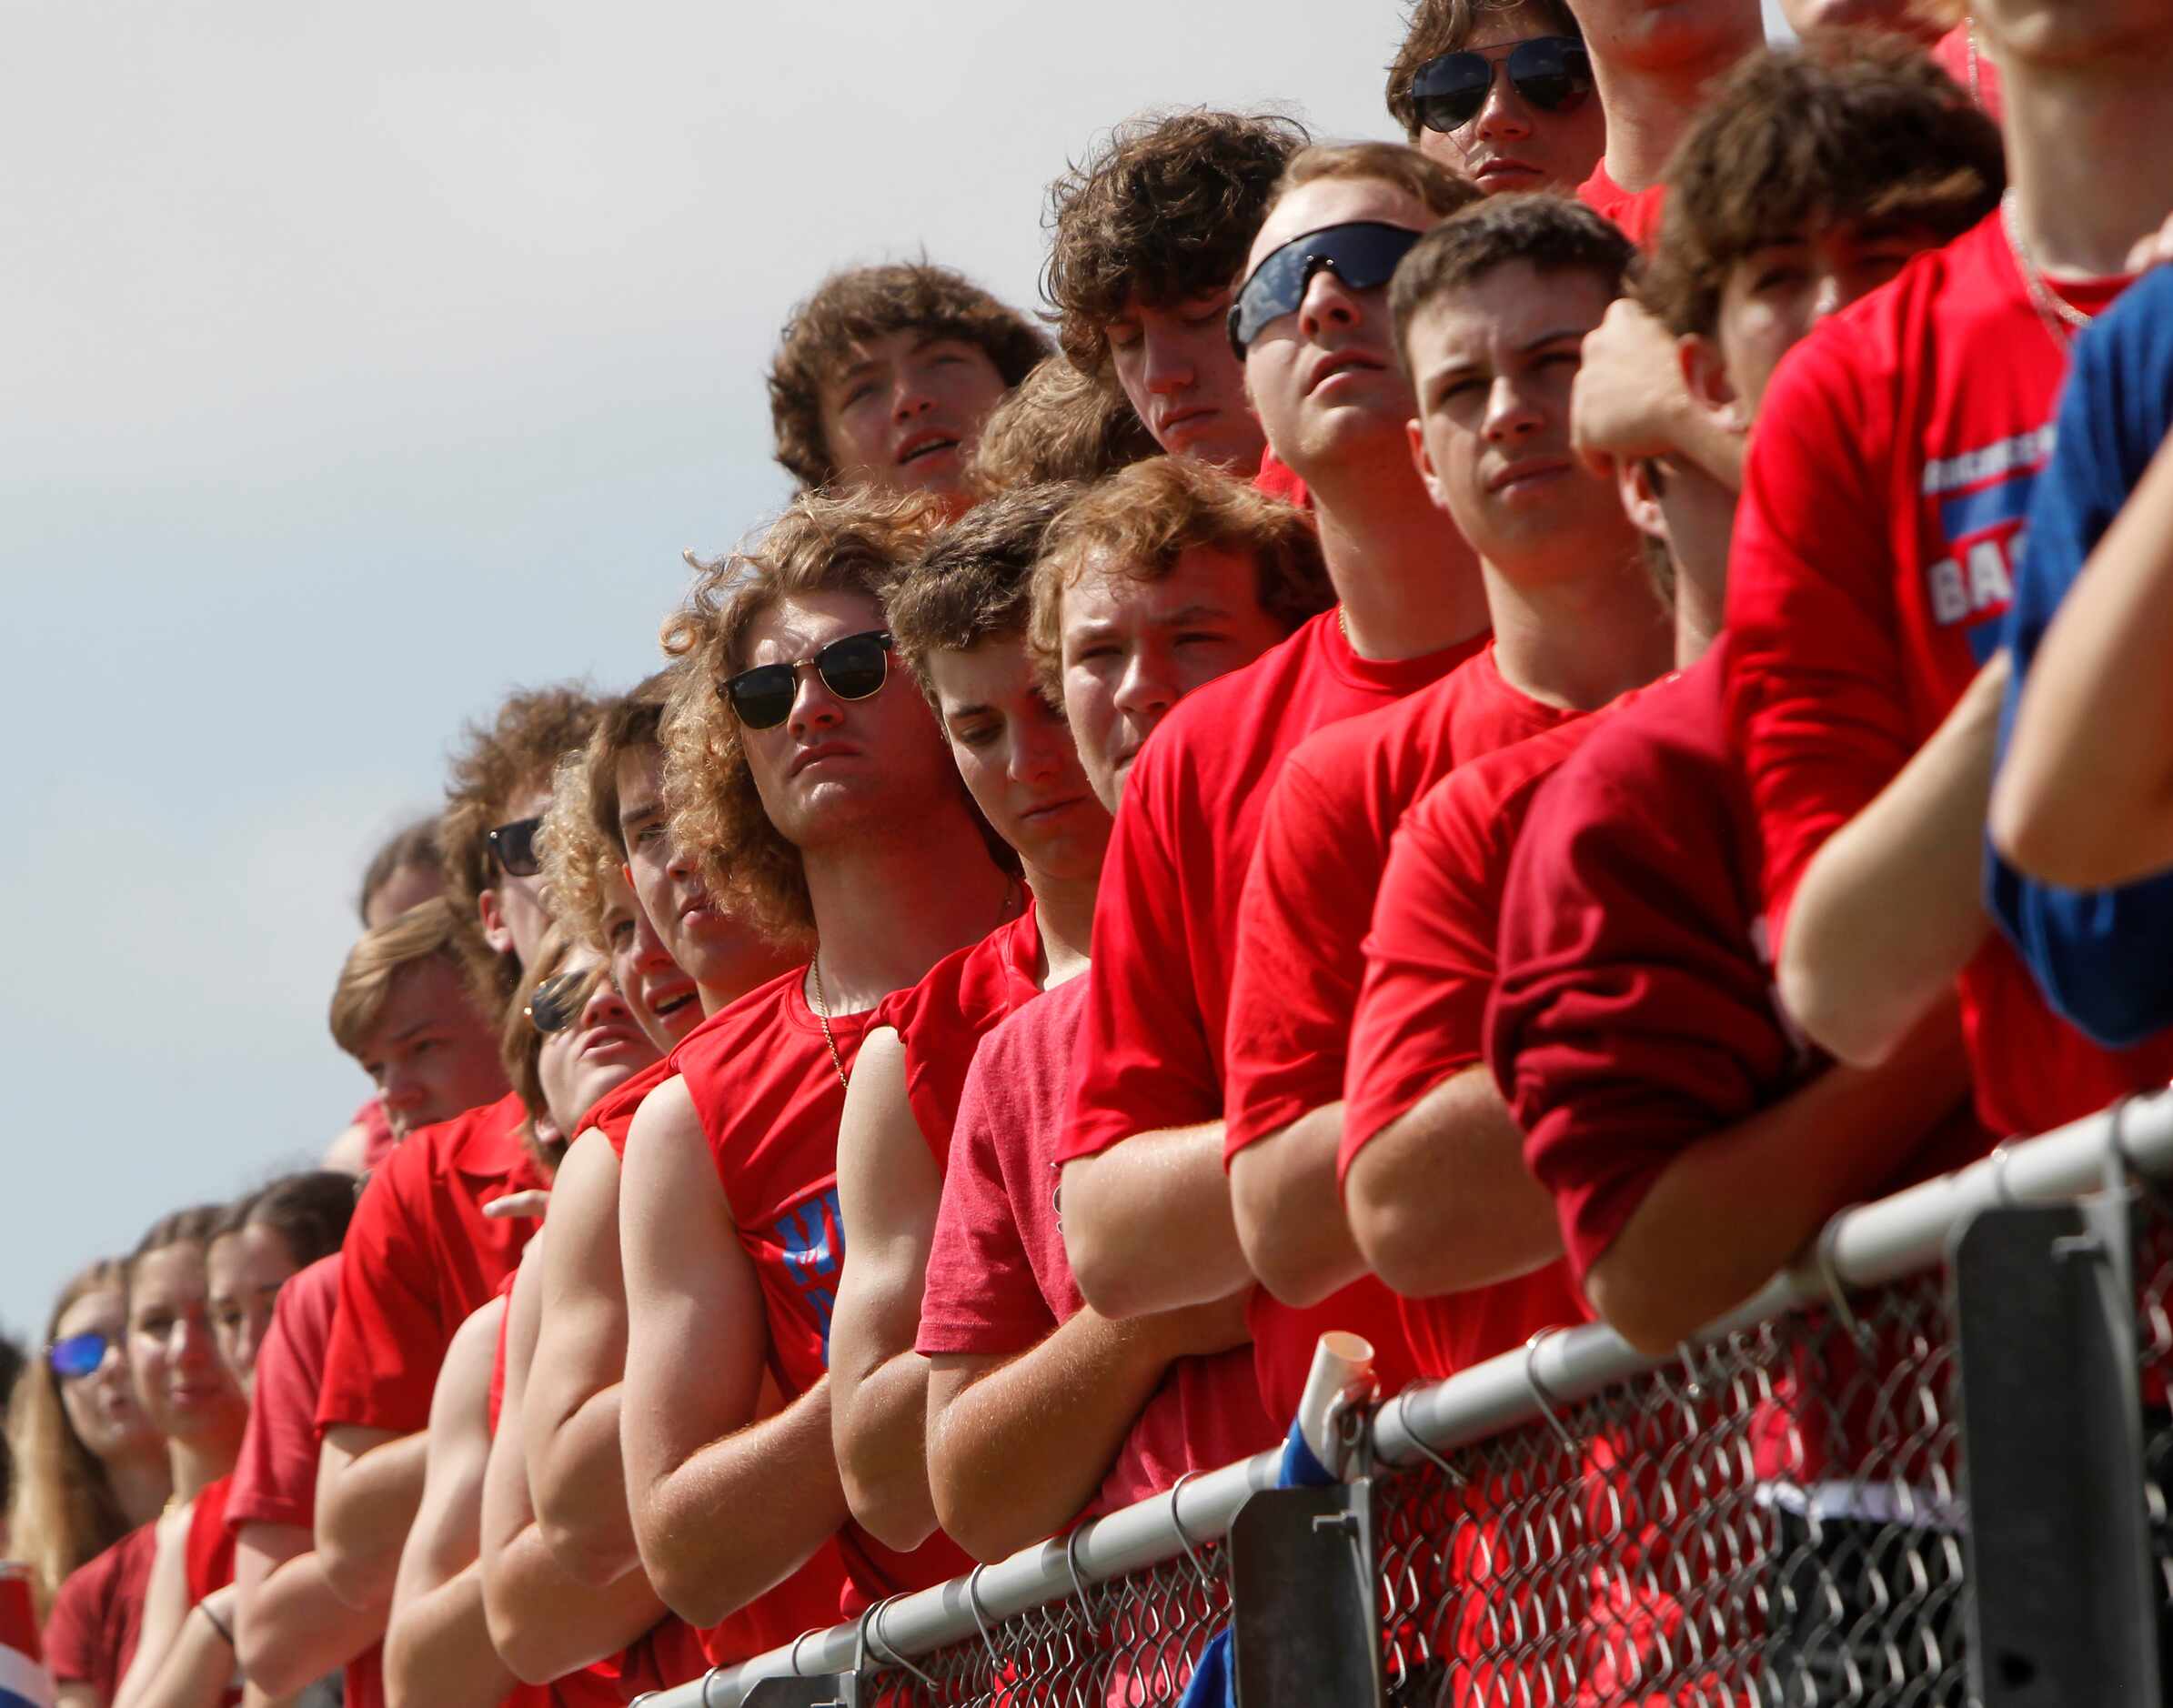 Grapevine students made a strong presence in support of the Lady Mustangs just prior to the...